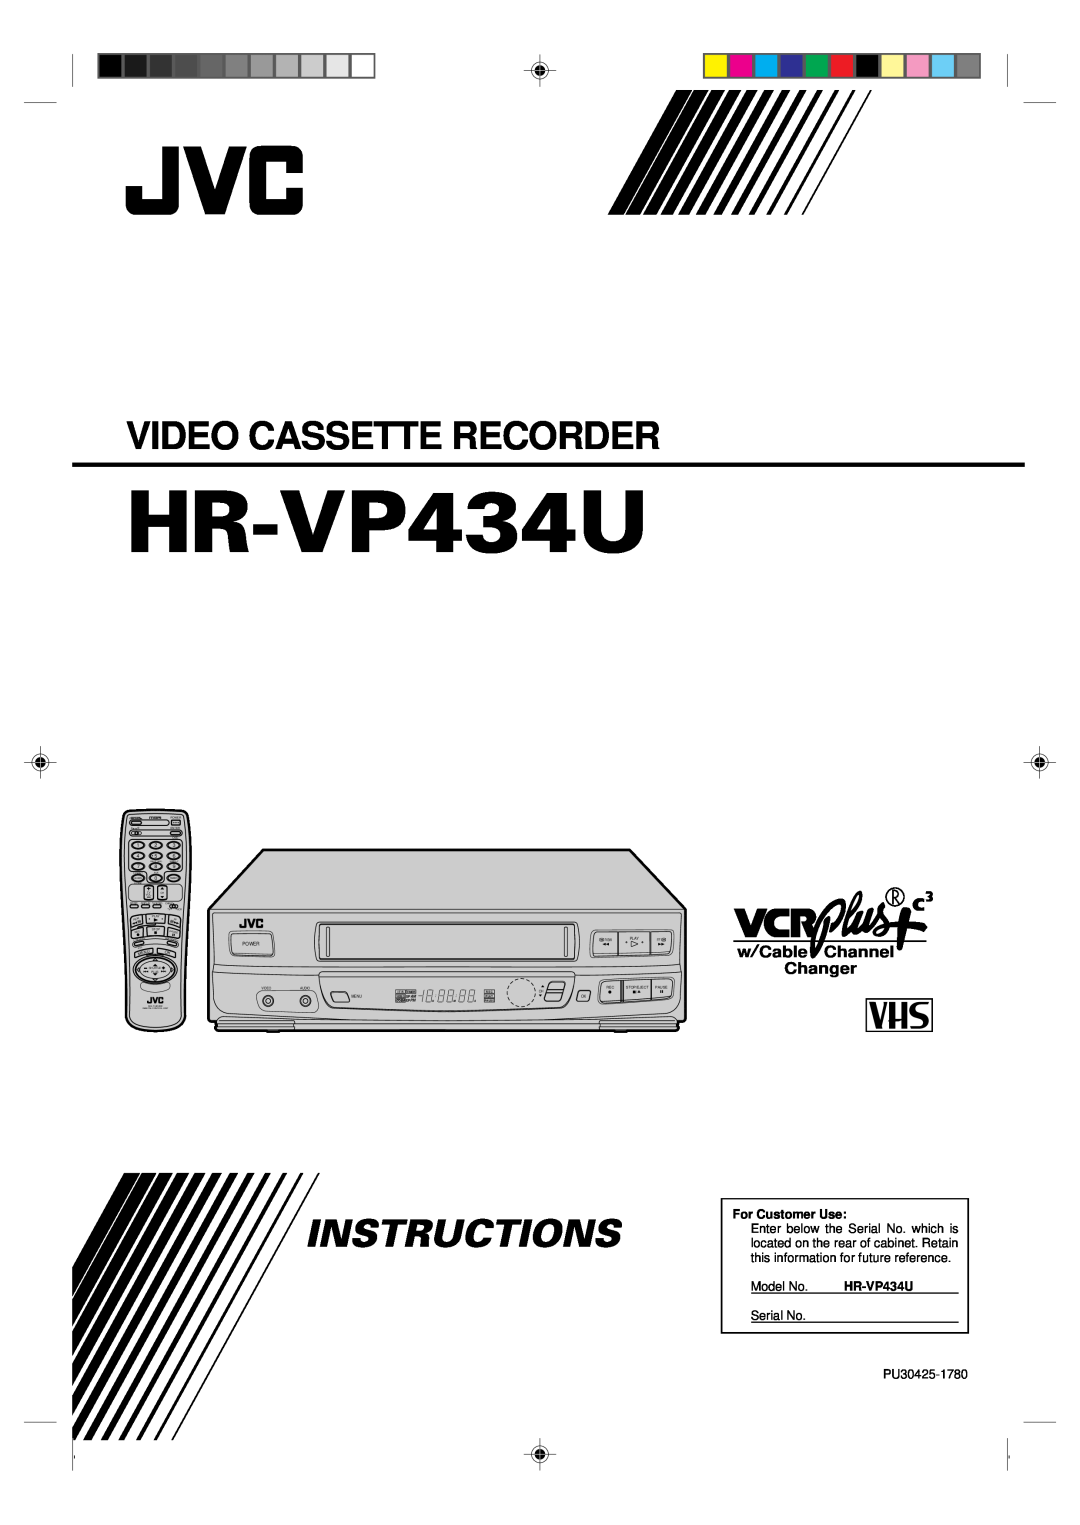 JVC HR-VP434U manual Video Cassette Recorder, Instructions, wCable Channel Changer, For Customer Use, Model No, Serial No 